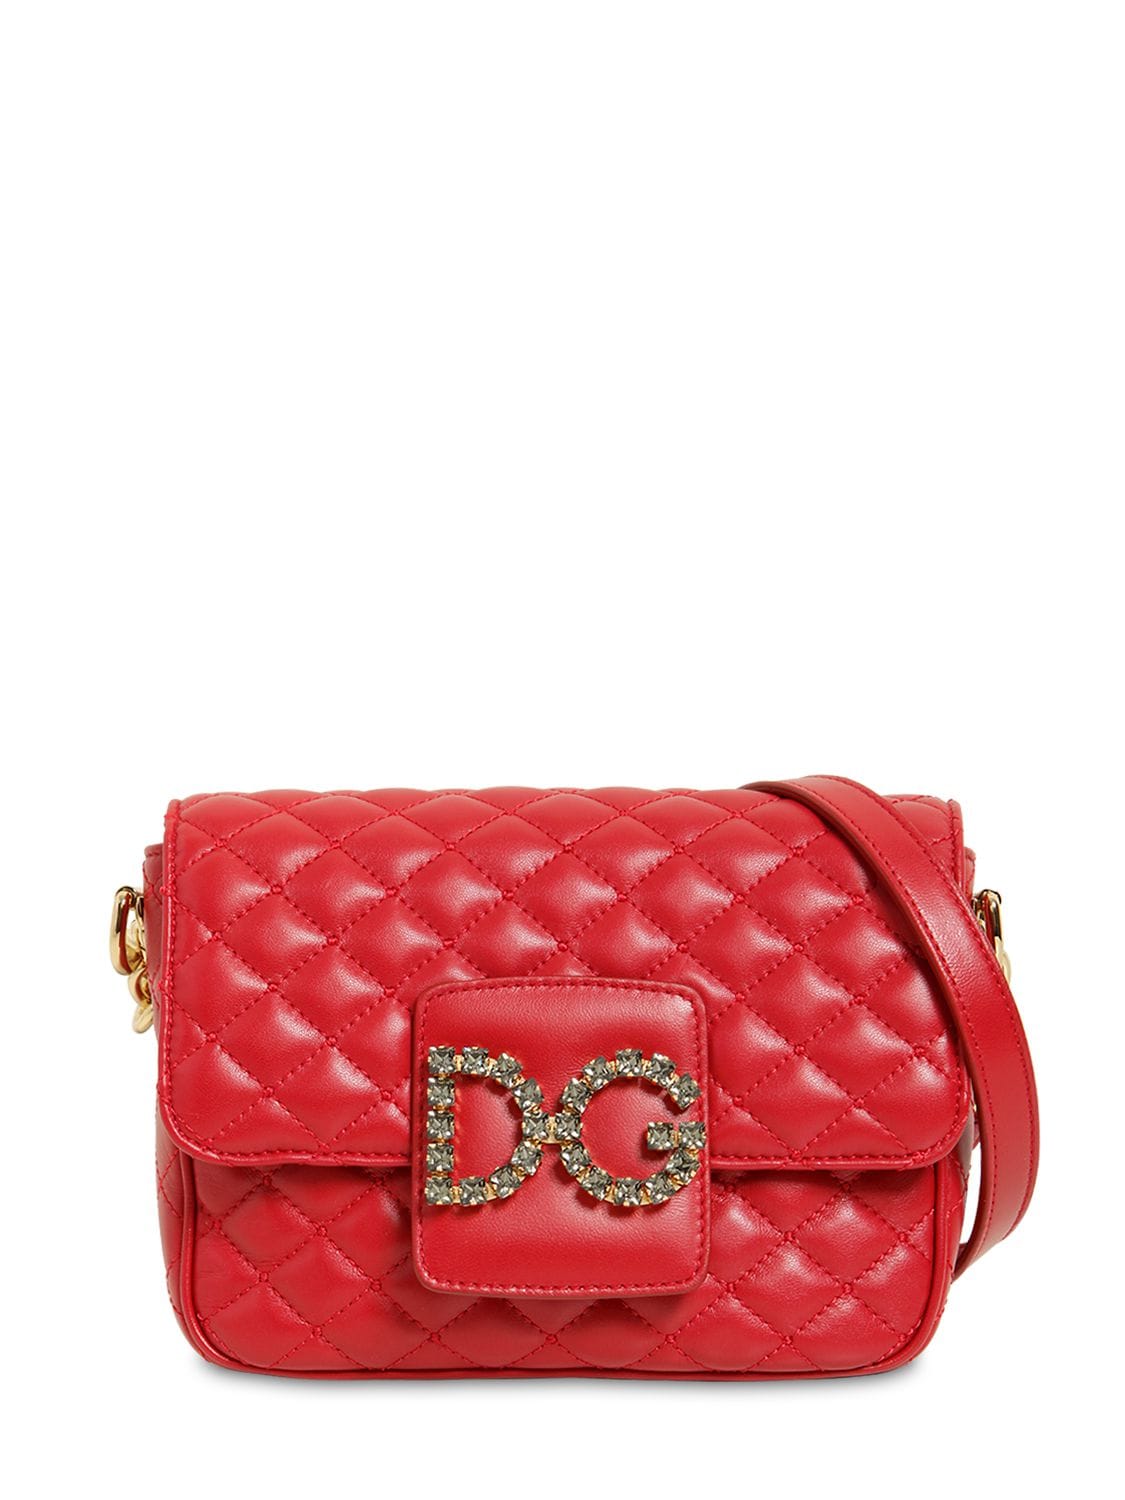 Dolce & Gabbana Small Millennial Quilted Leather Bag In Red